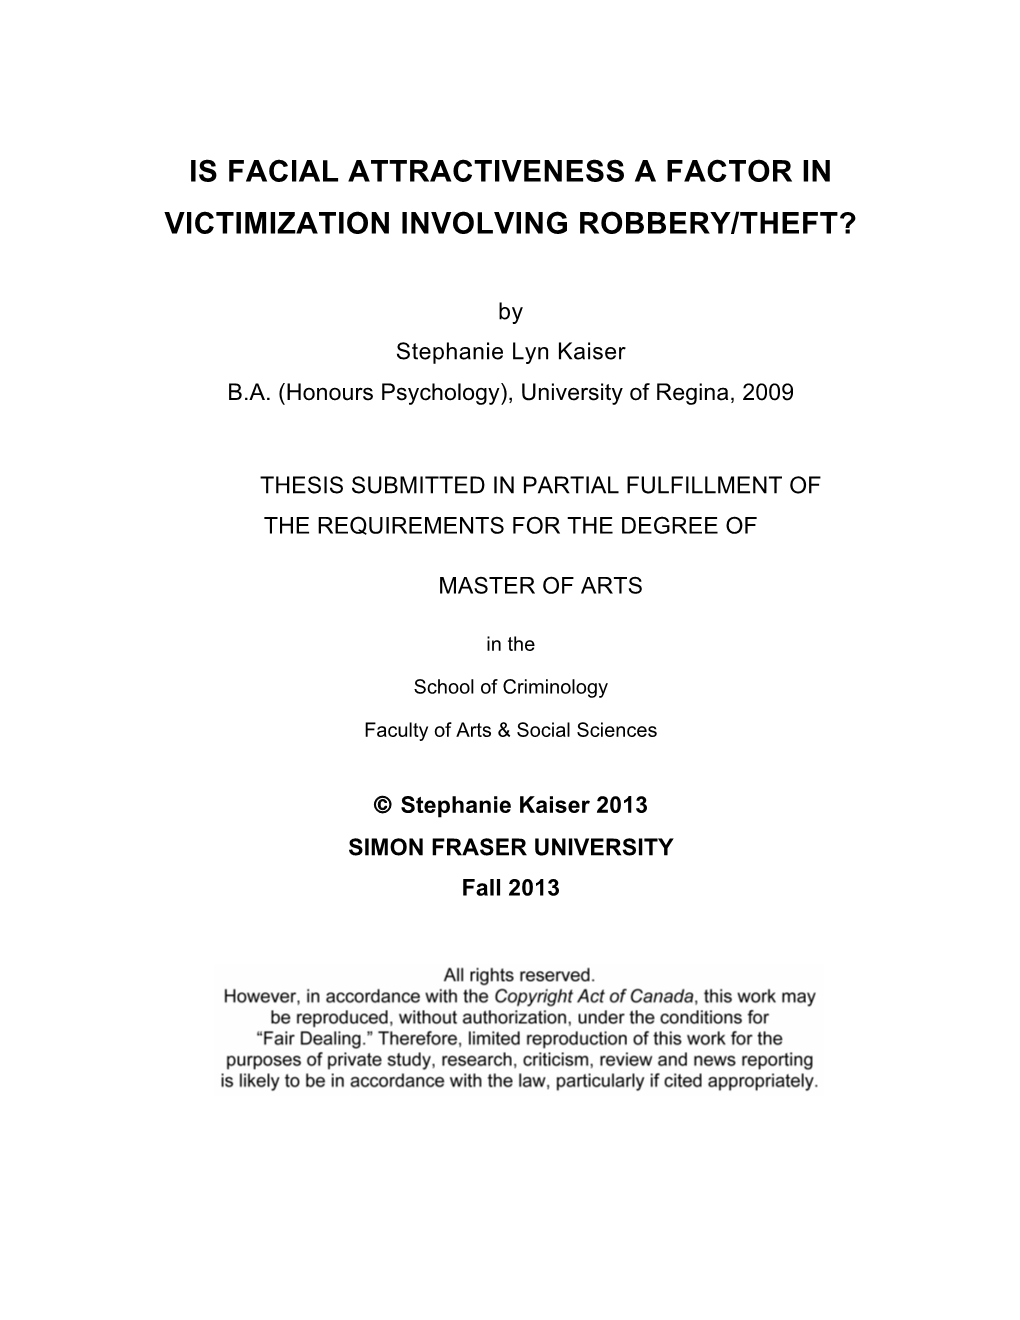 Is Facial Attractiveness a Factor in Victimization Involving Robbery/Theft?